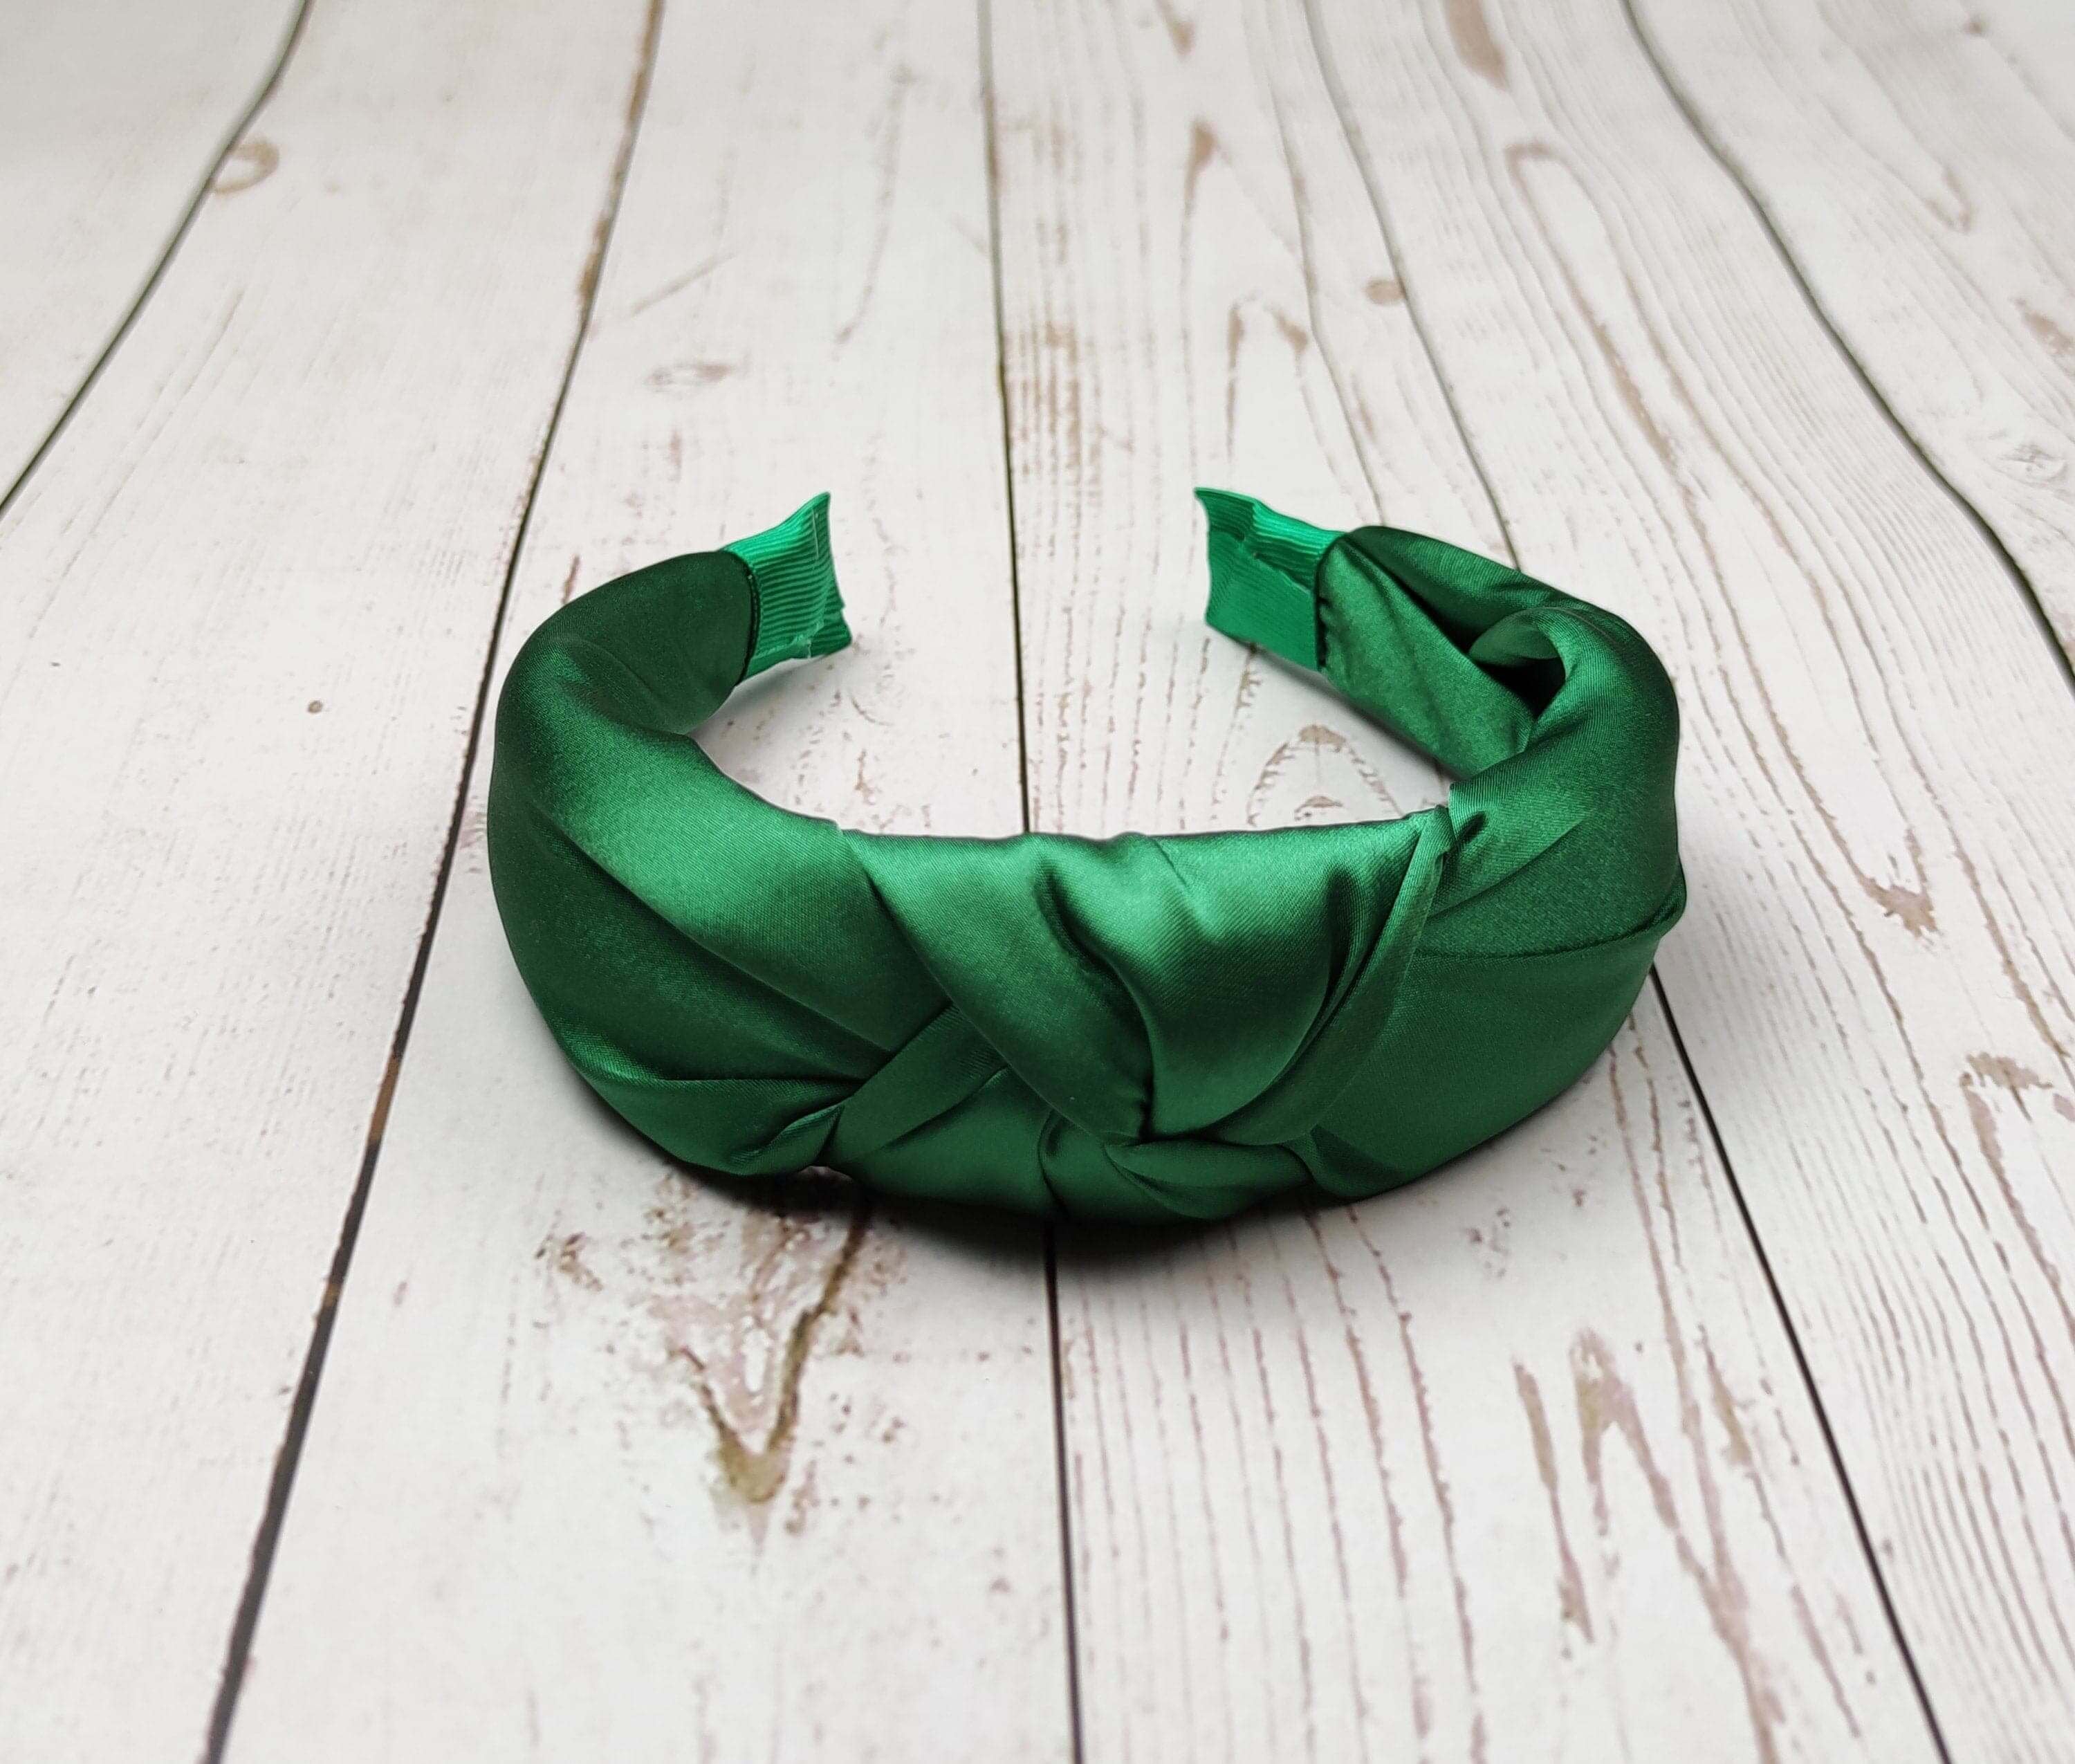 If you are looking for designer hair band then look no further than our selection of padded headbands. Made with luxurious materials and designed with precision, these headbands are perfect for any occasion.